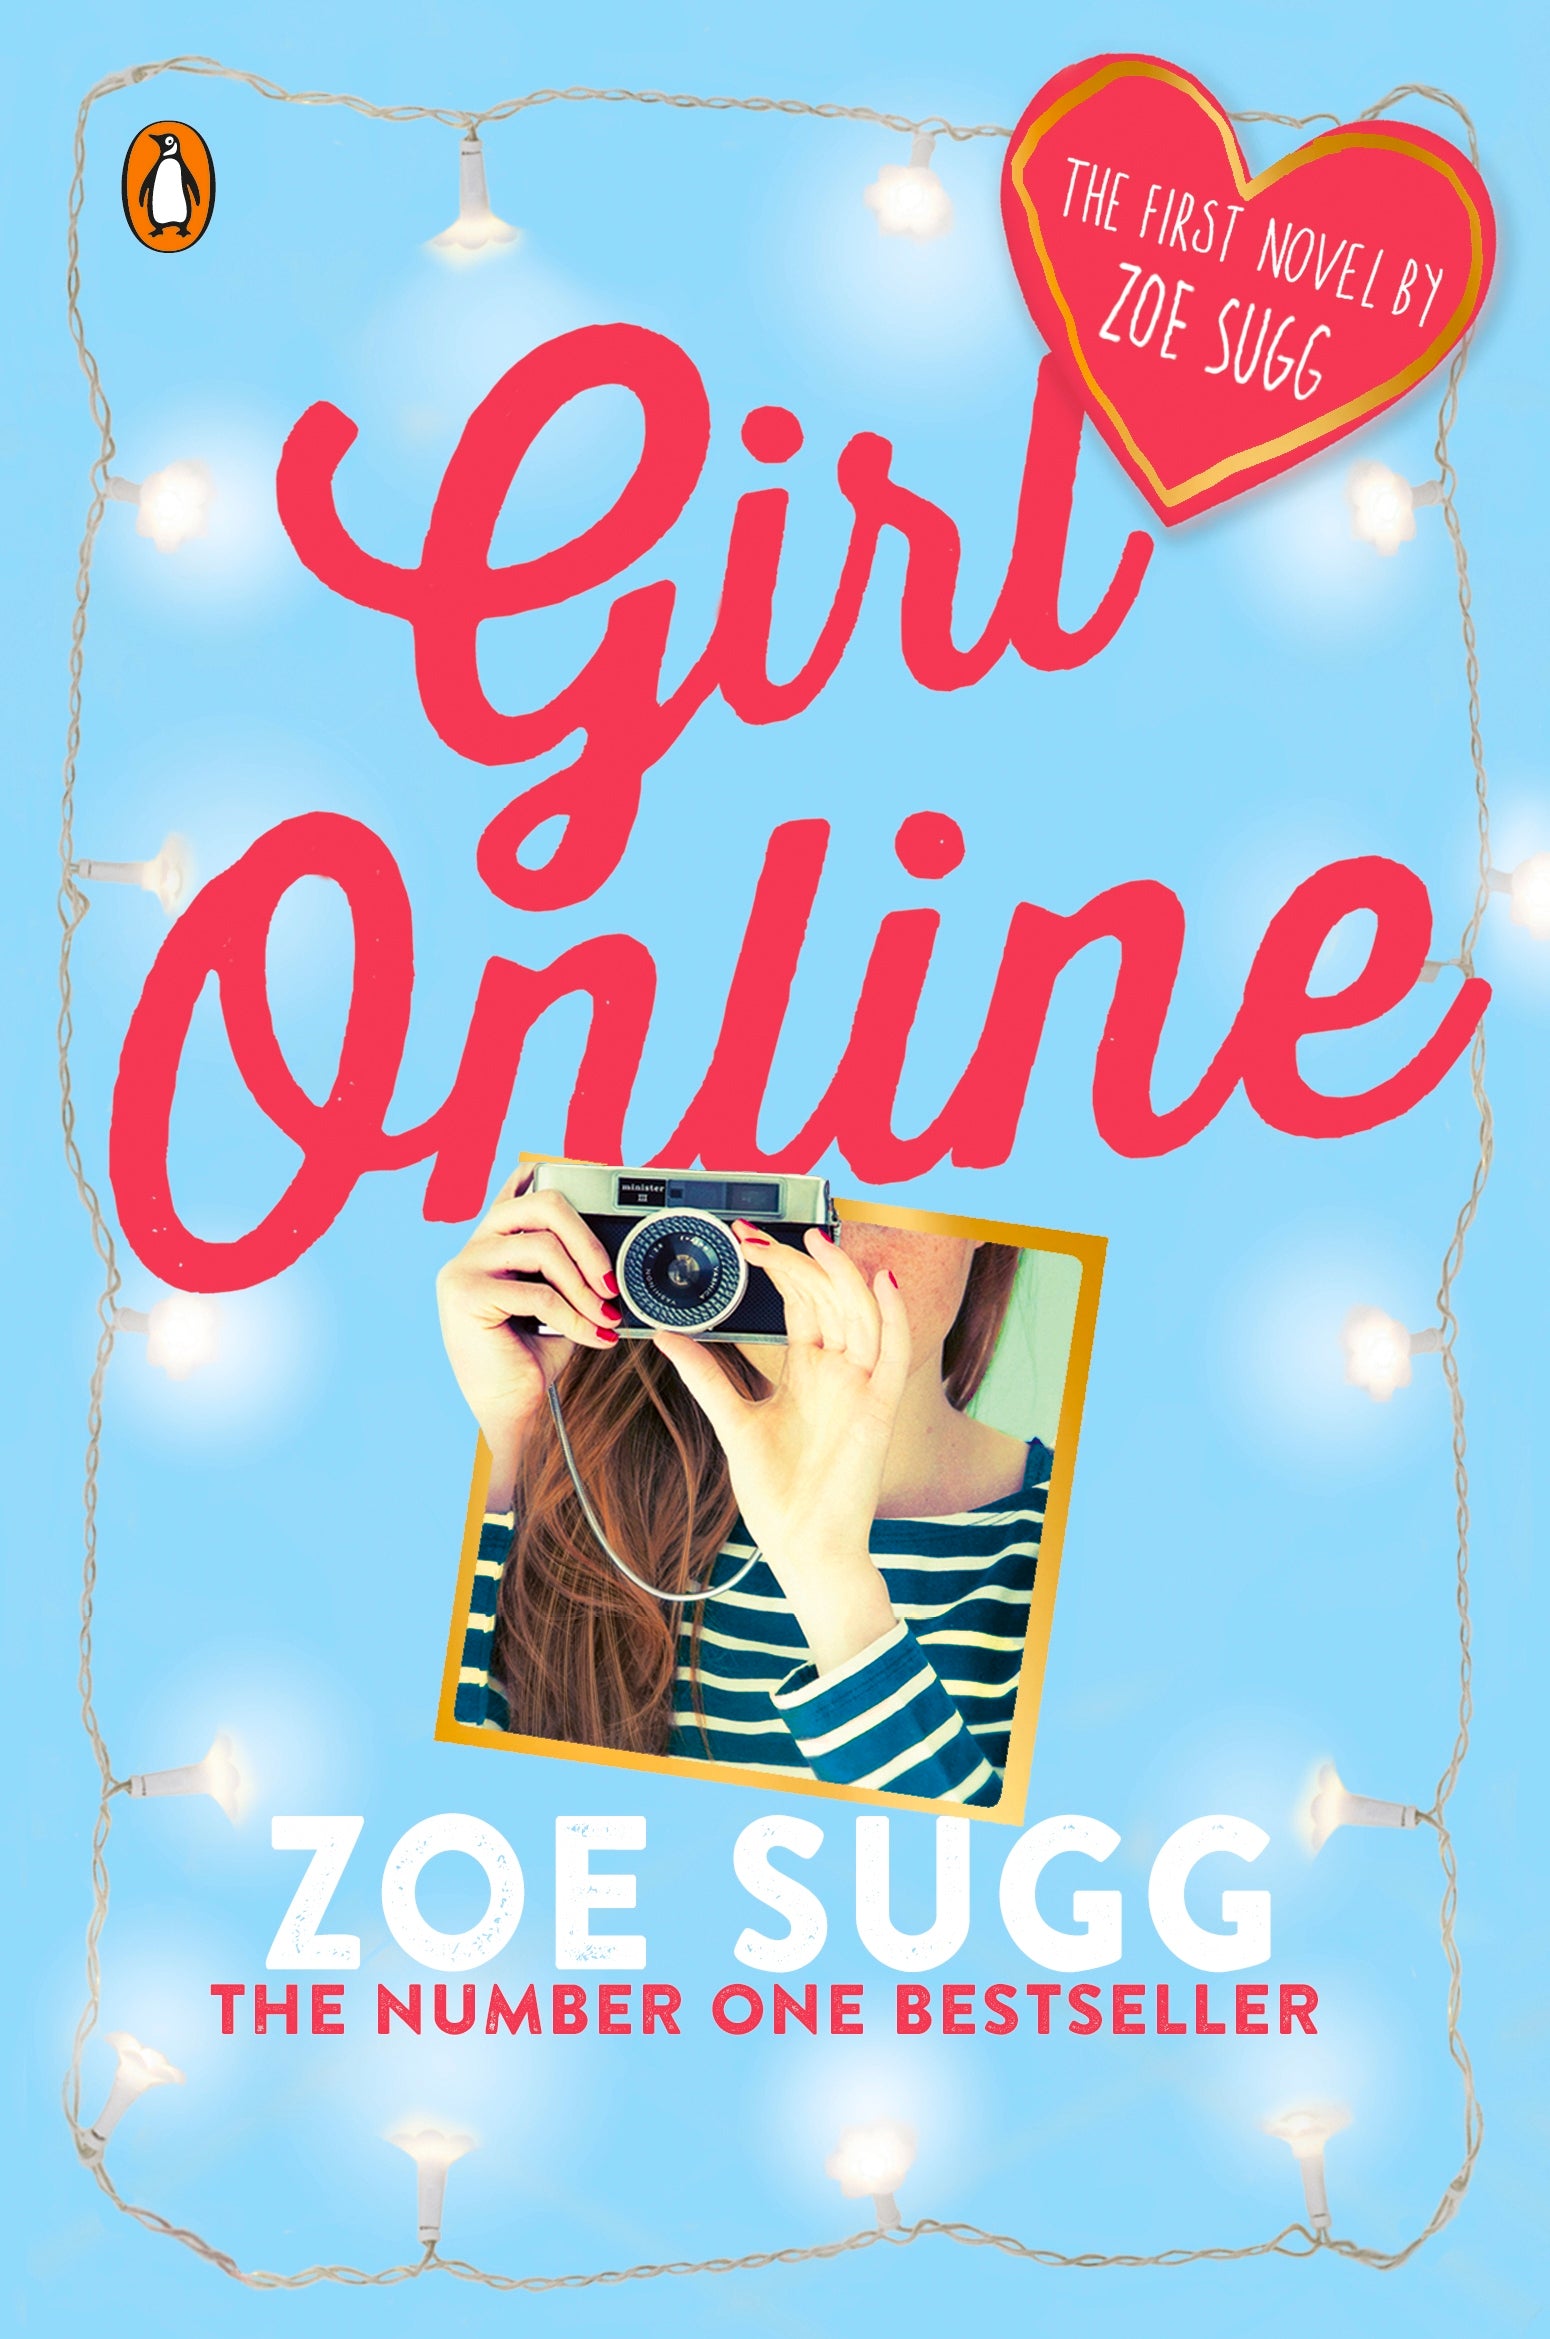 Girl Online: The First Novel by Zoella (1) (Girl Online Book)